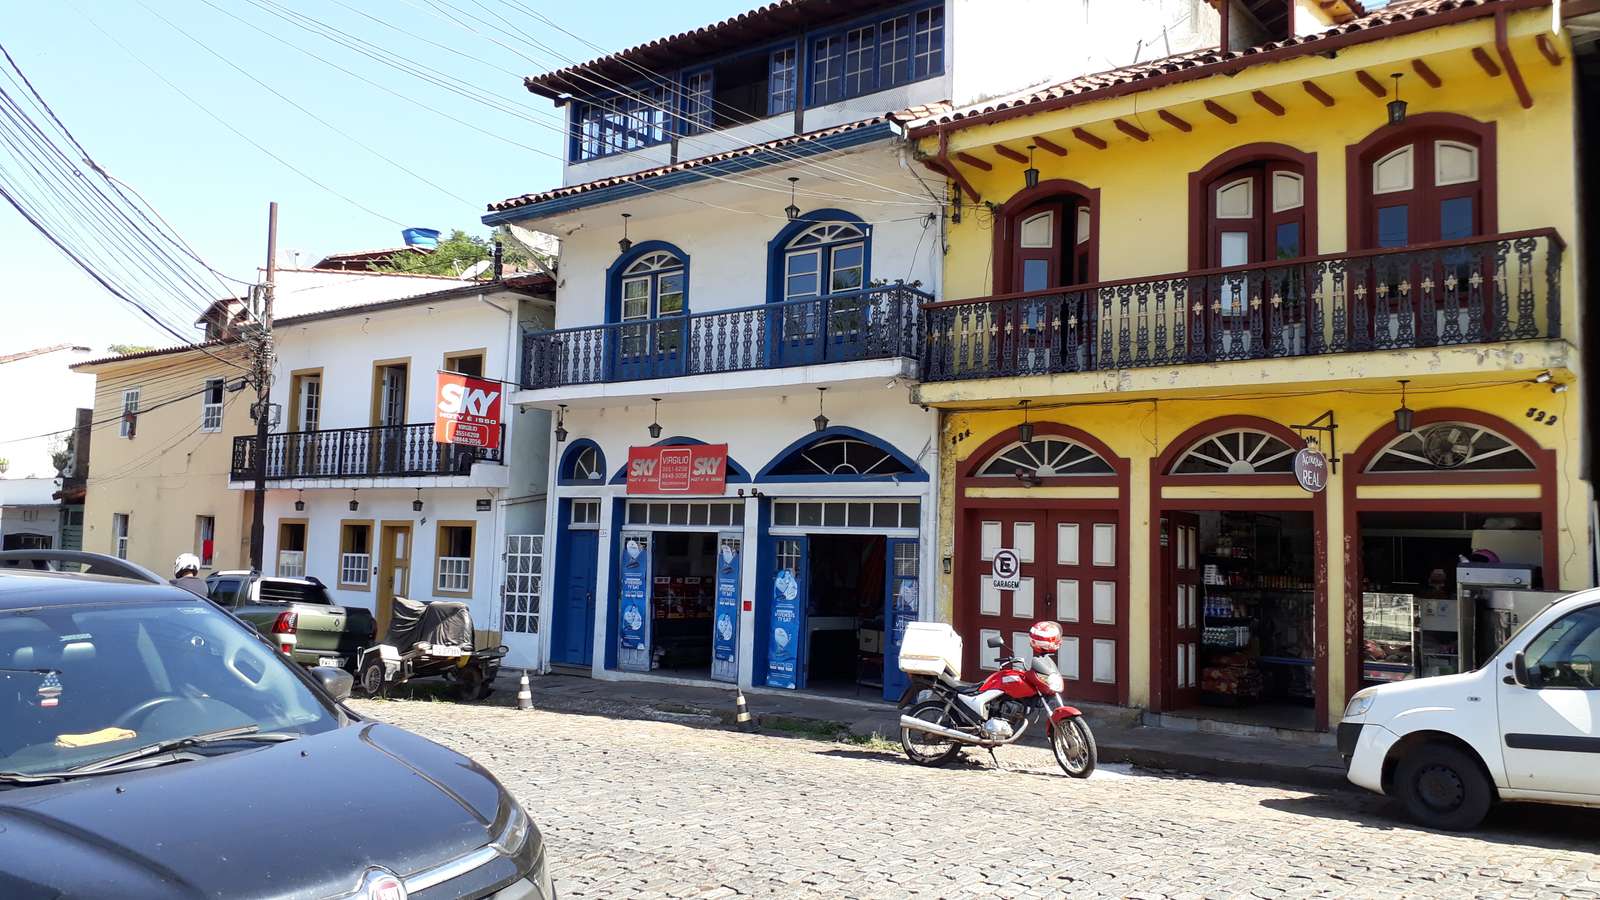 Houses in Ouro Preto - MG - Brazil online puzzle